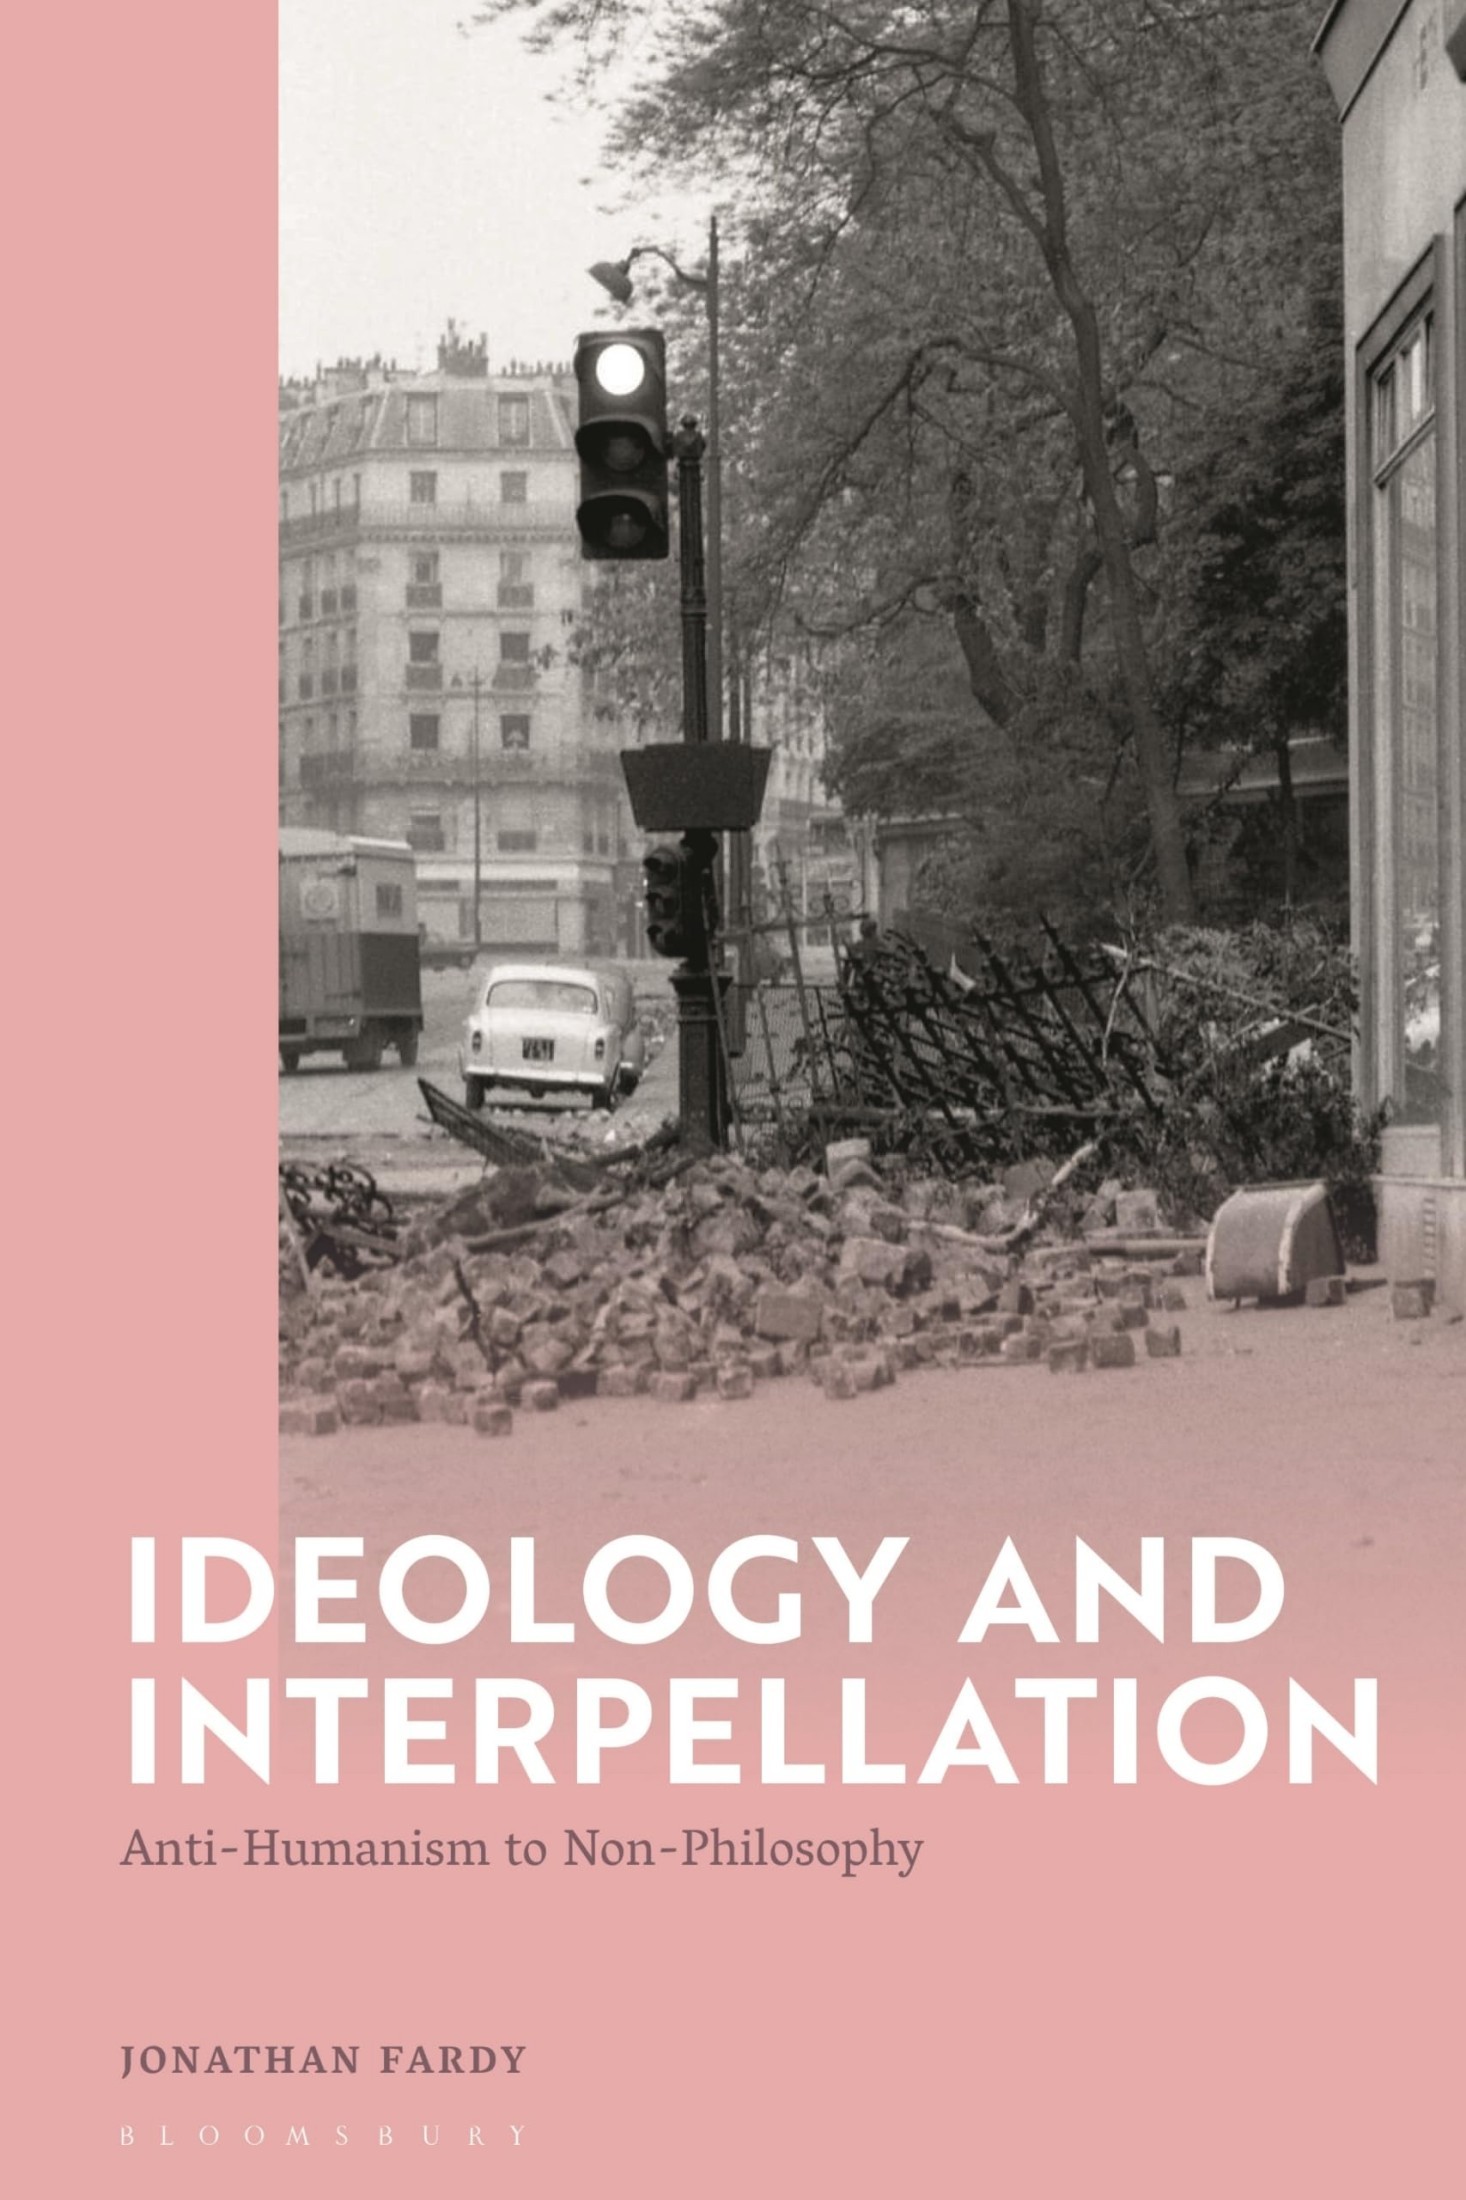 Ideology and Interpellation: Anti-Humanism to Non-Philosophy